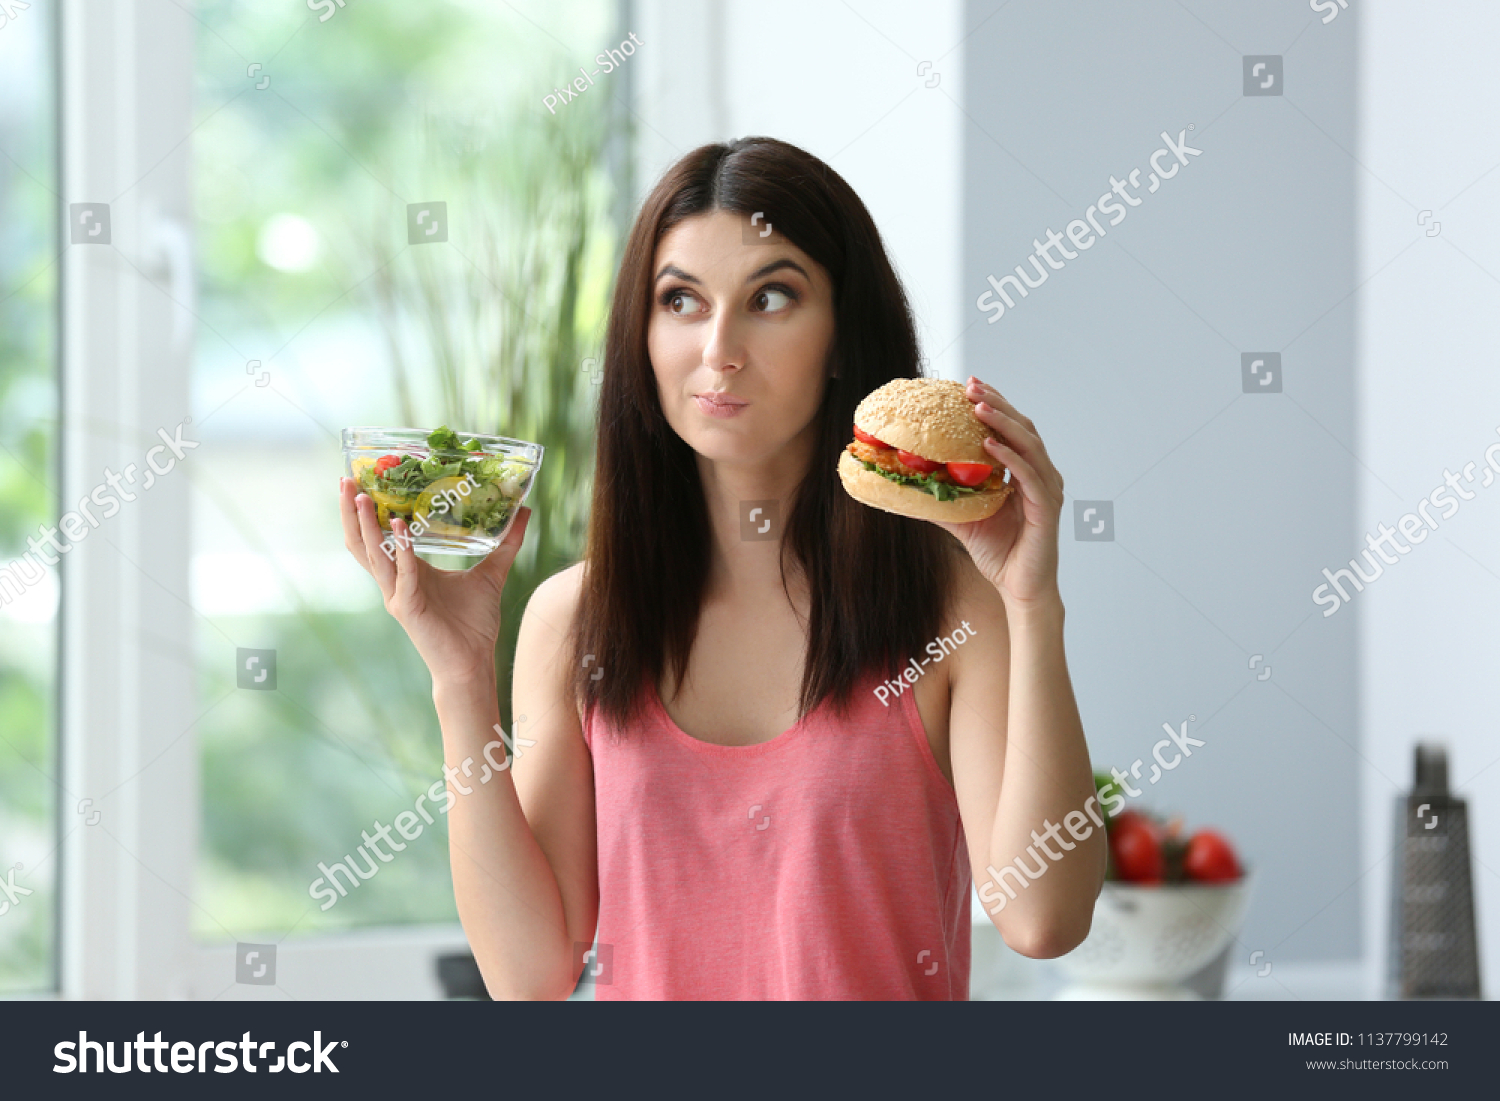 Woman with tasty burger and fresh salad indoors. Choice between healthy and unhealthy food #1137799142